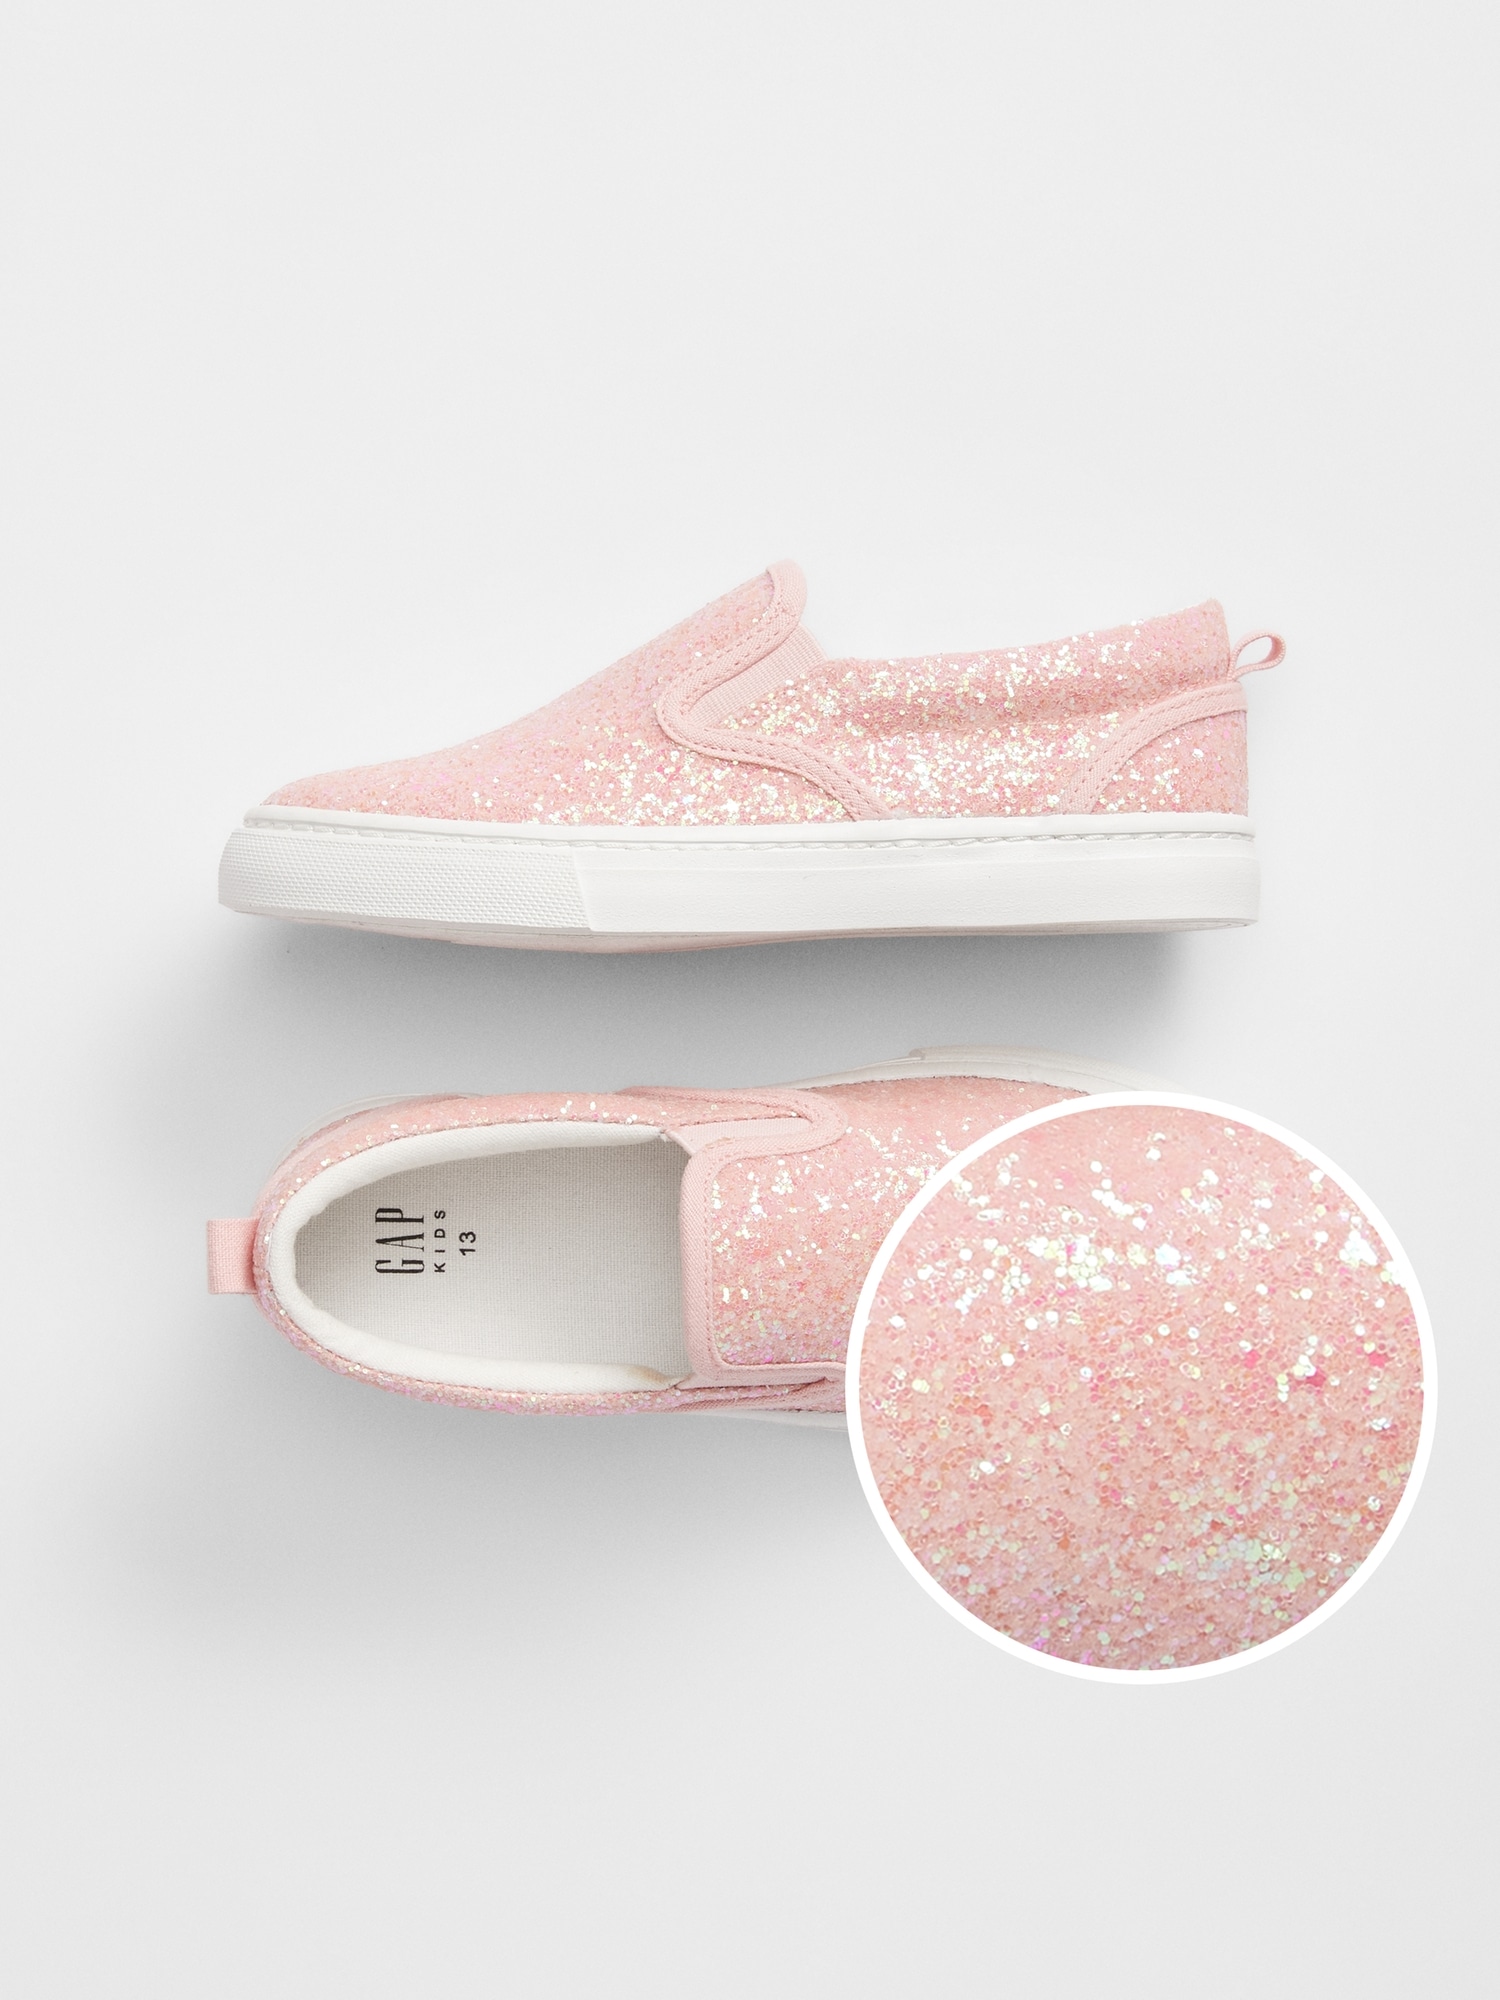 pink glitter shoes girl